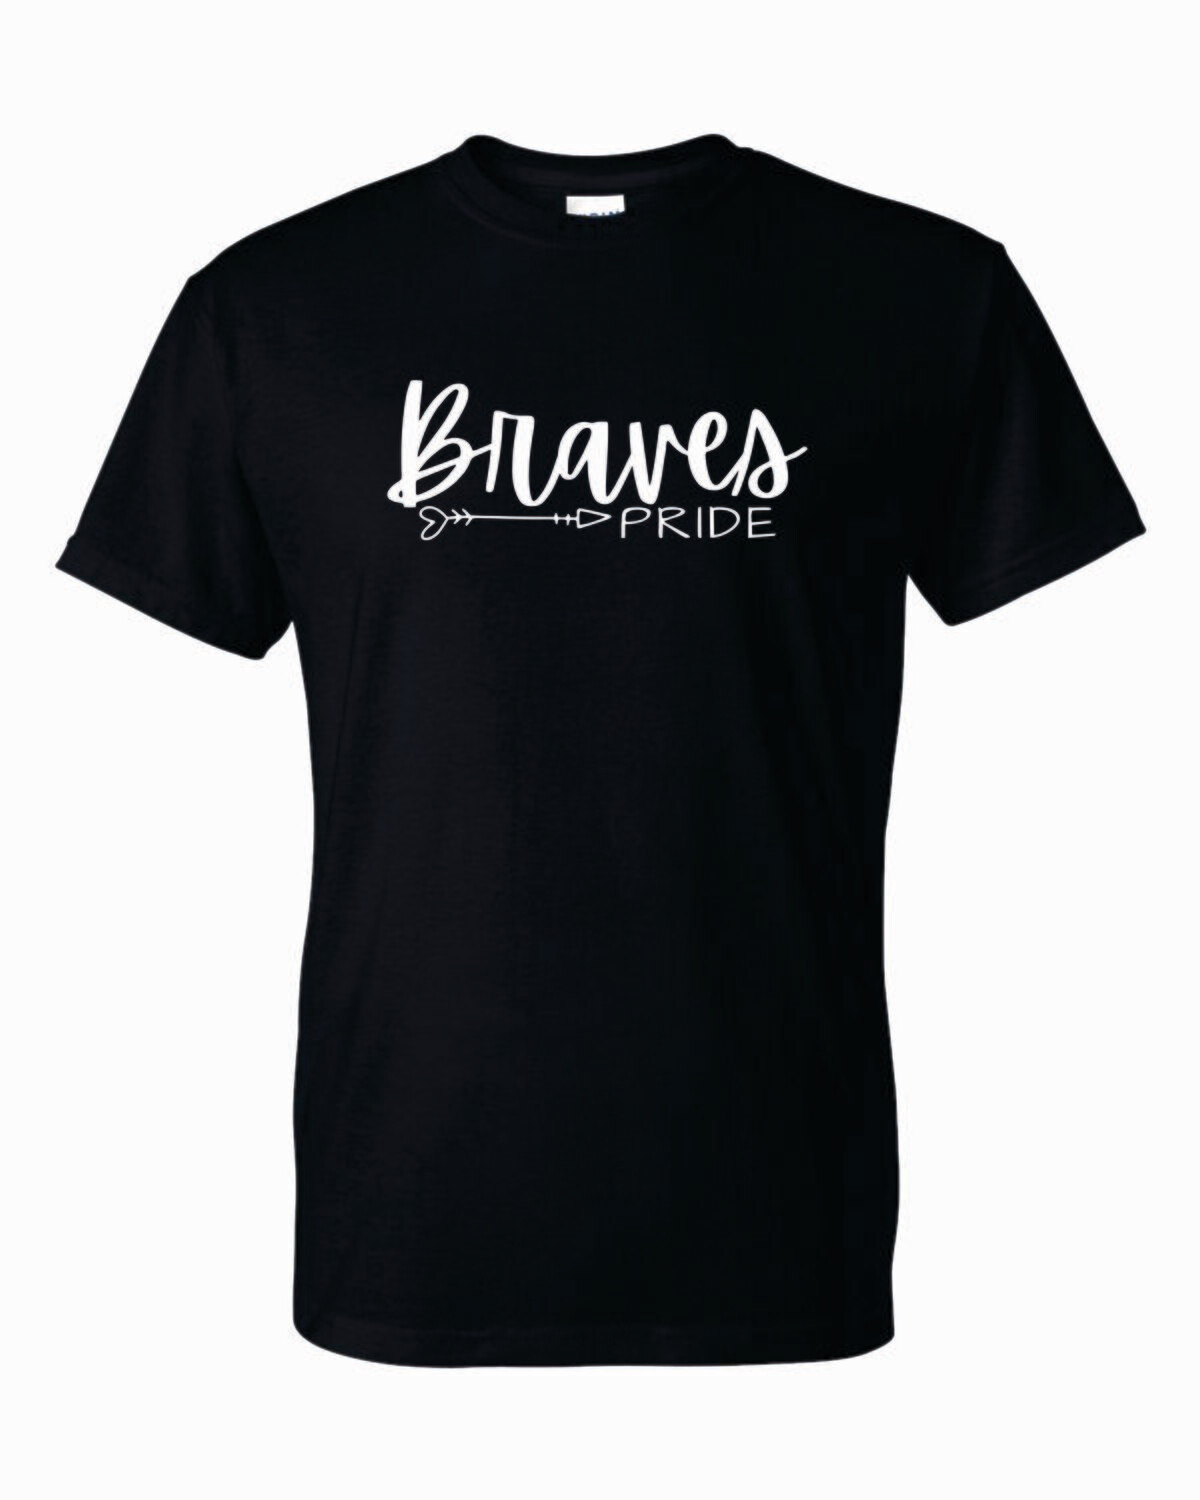 Braves PRIDE T-shirt, 6 colors available